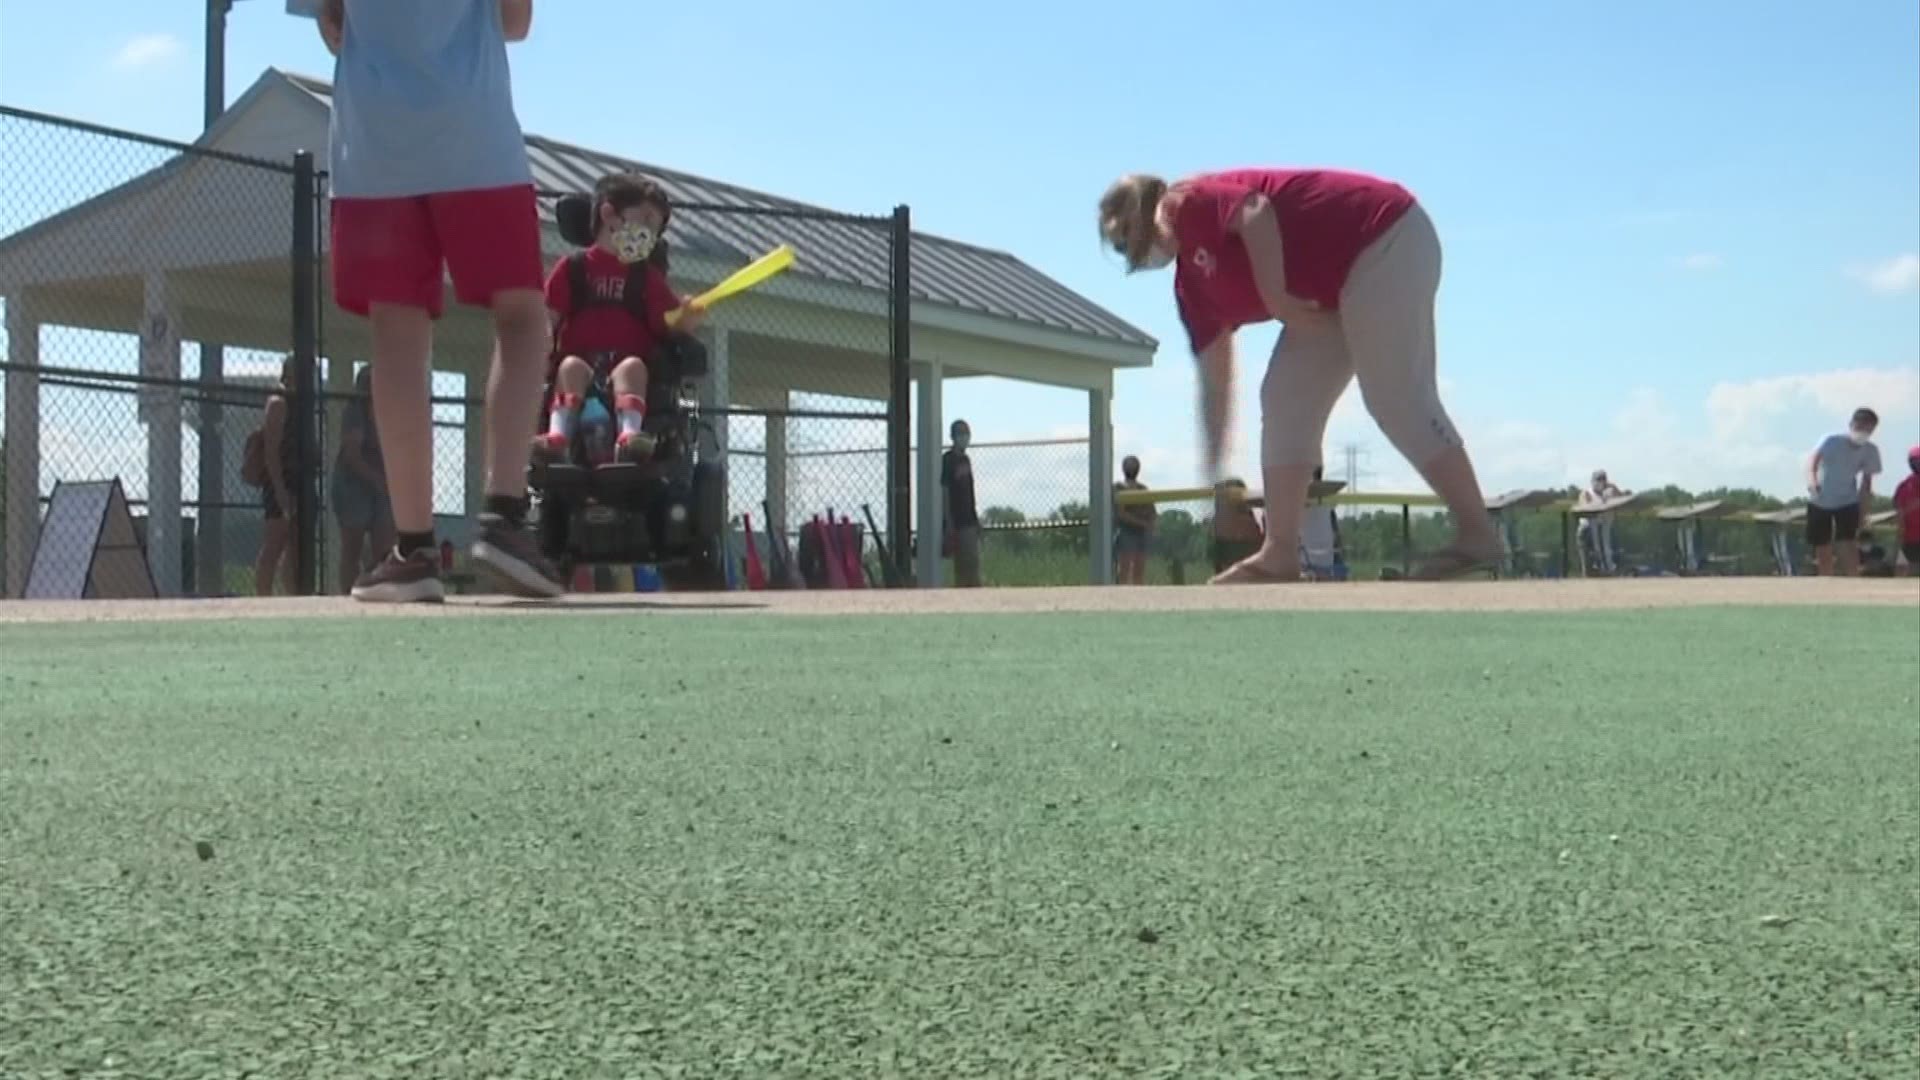 The Miracle League returns this summer with safety in mind.